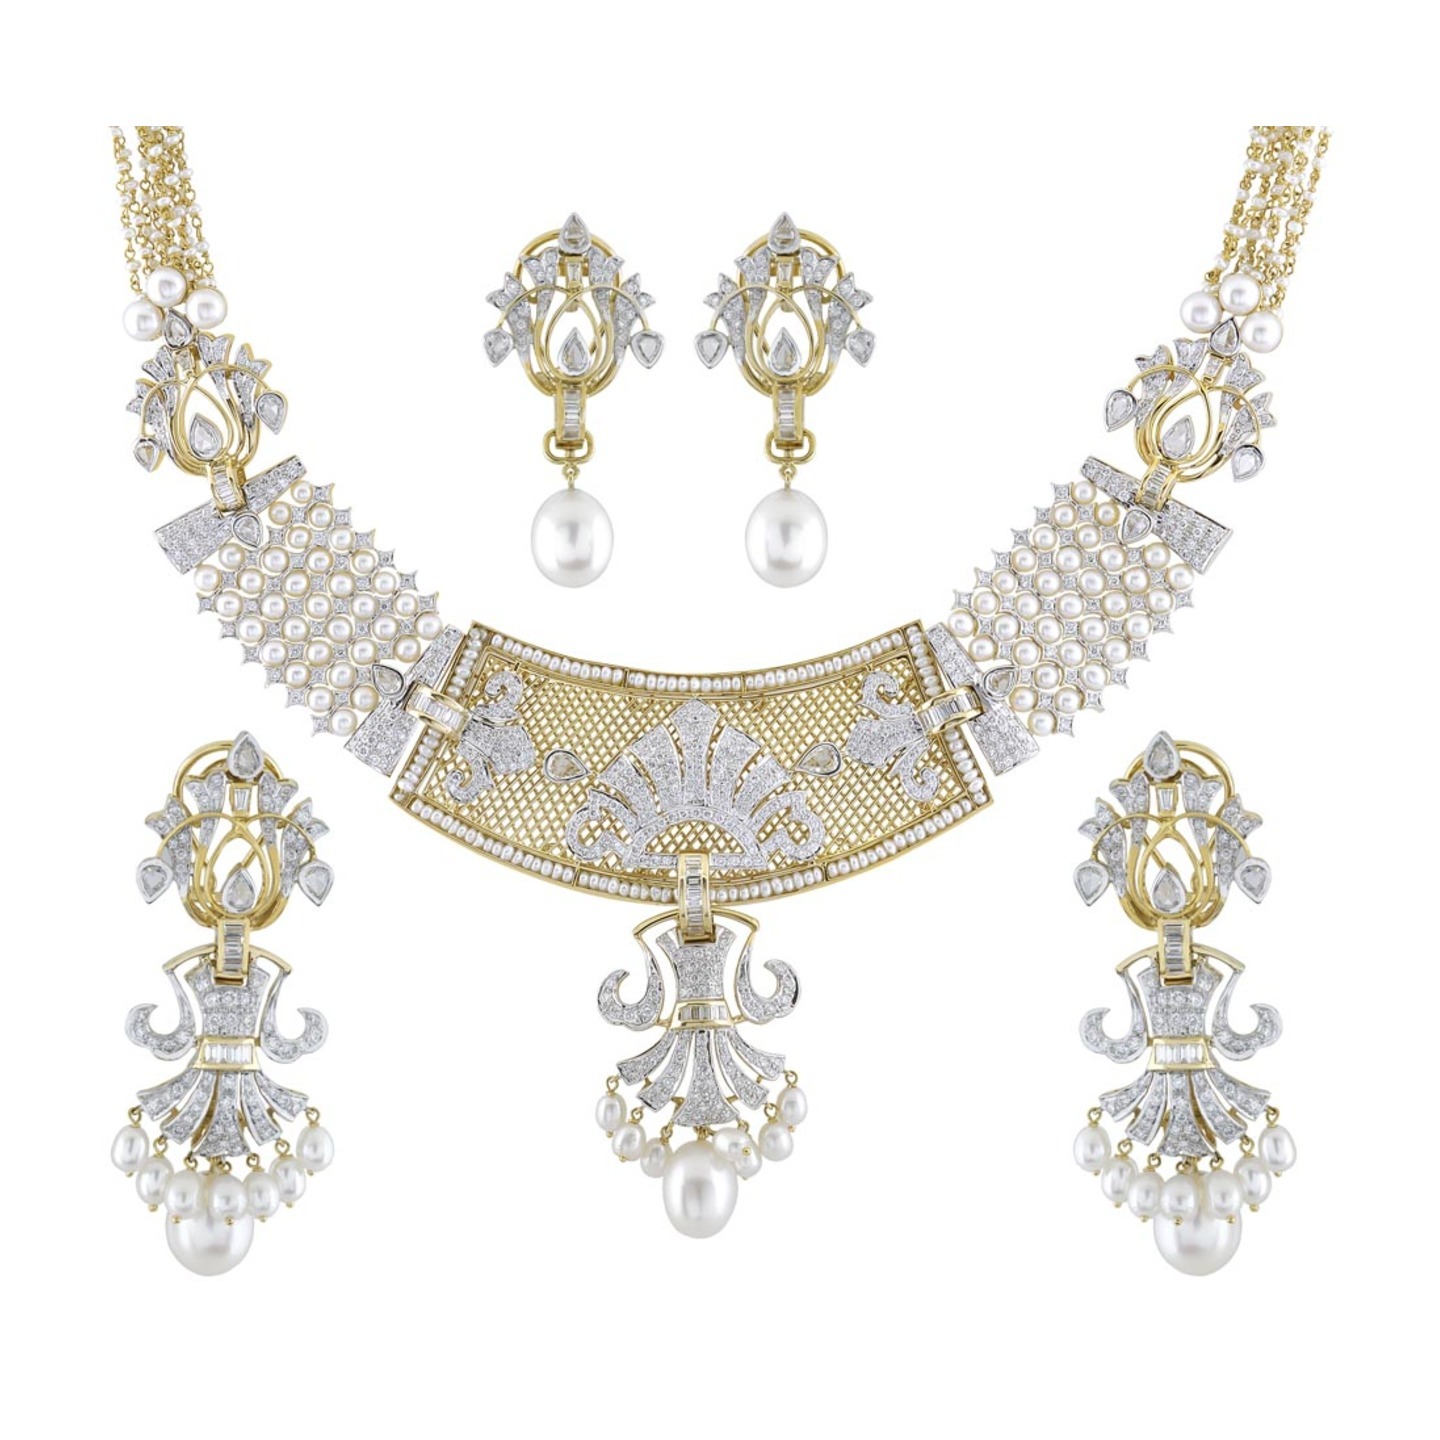 A Grand traditional yet delicate pearl diamond parure with multi functional wearability